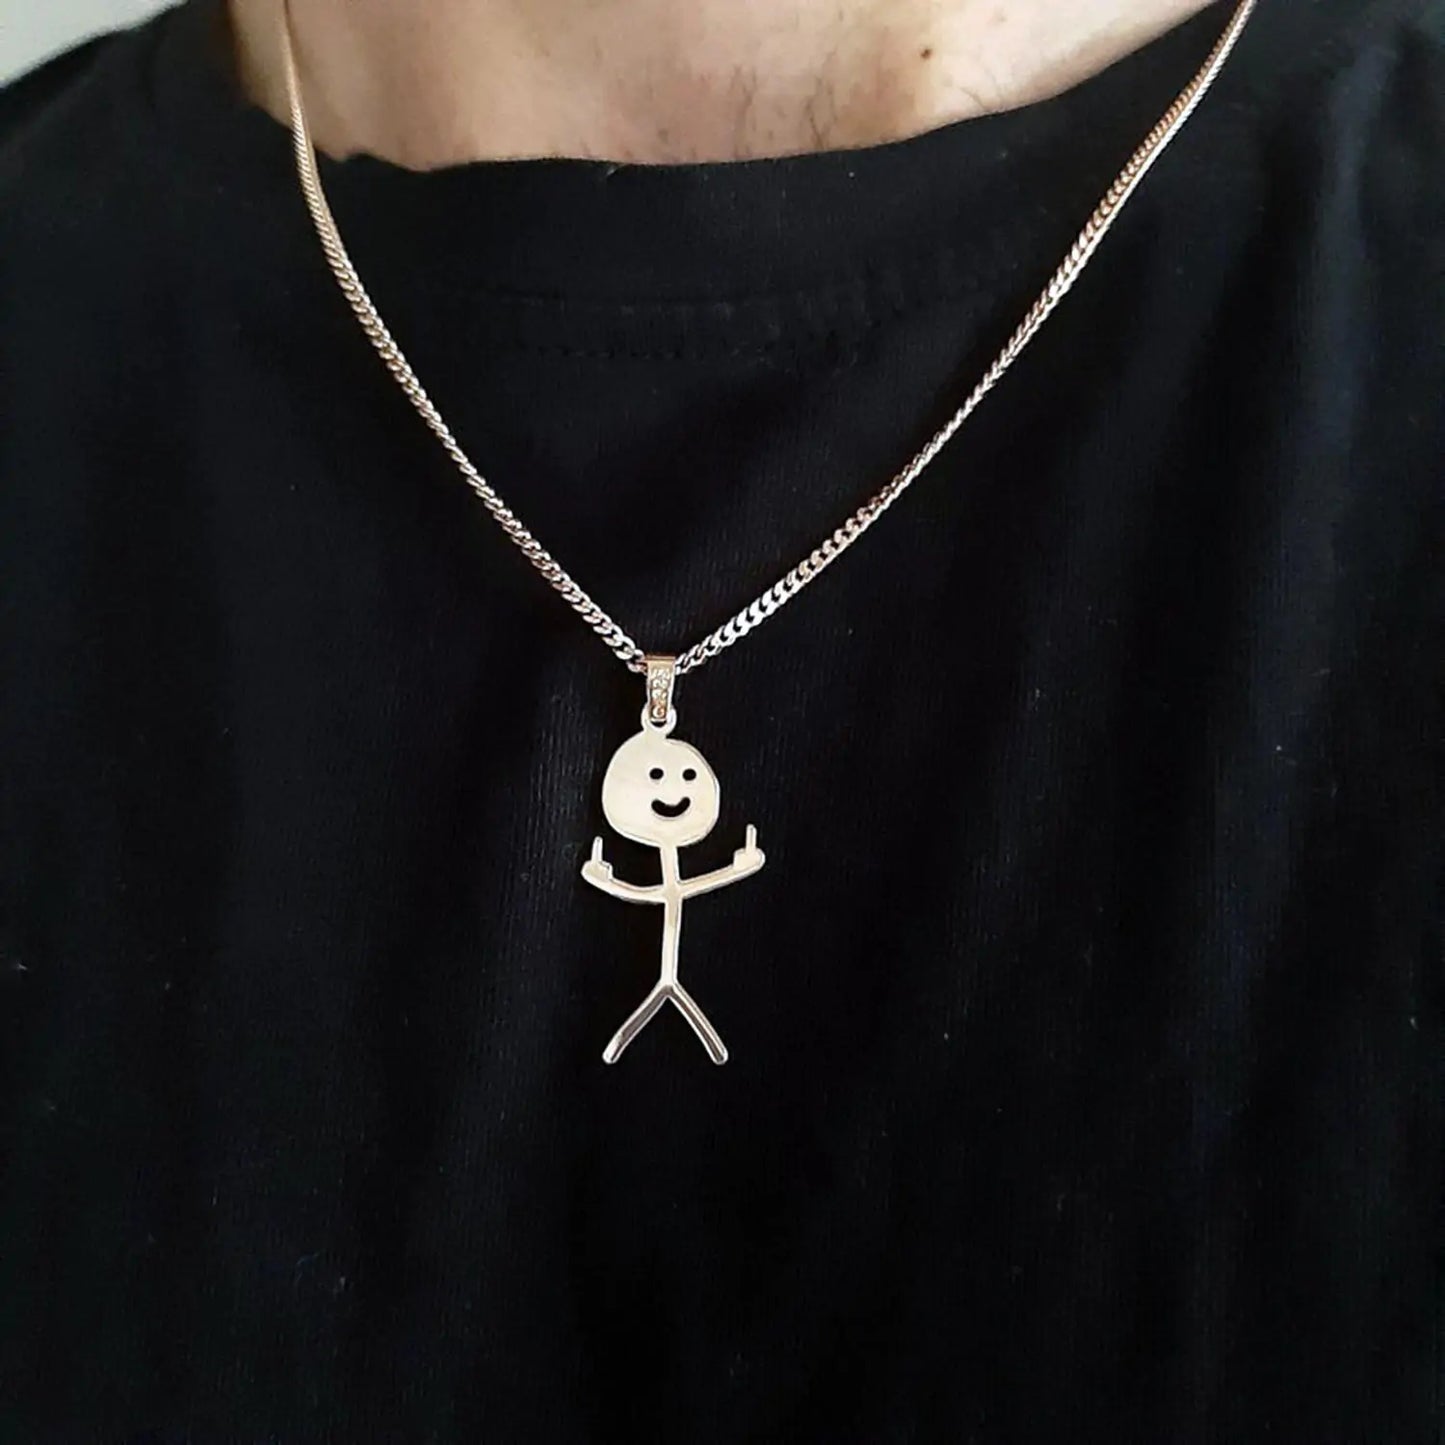 Stickman Pendant Necklace gold plated